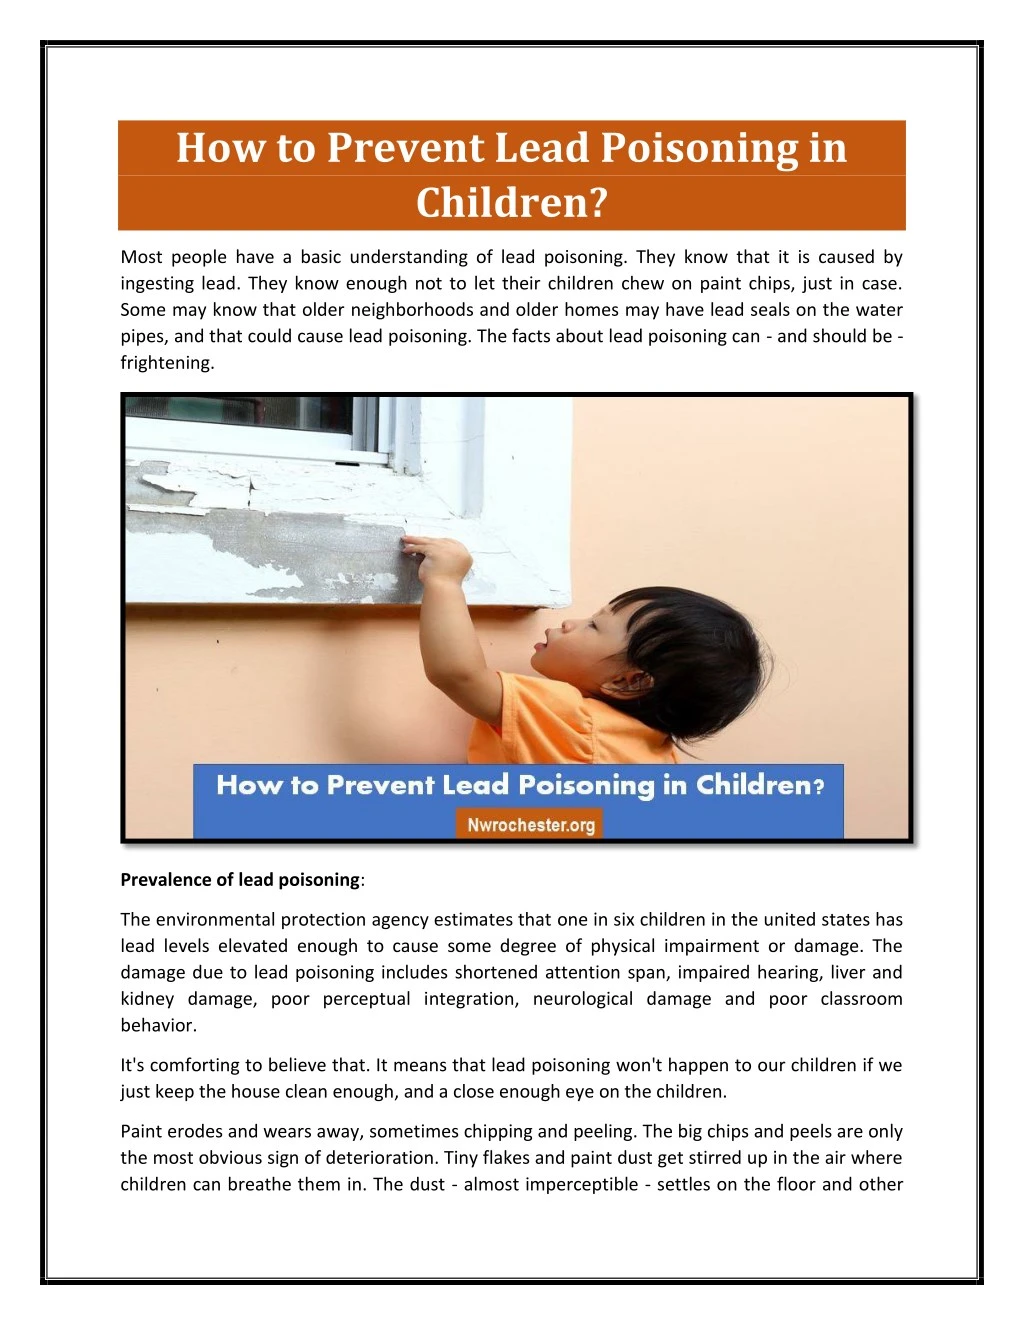 how to prevent lead poisoning in children